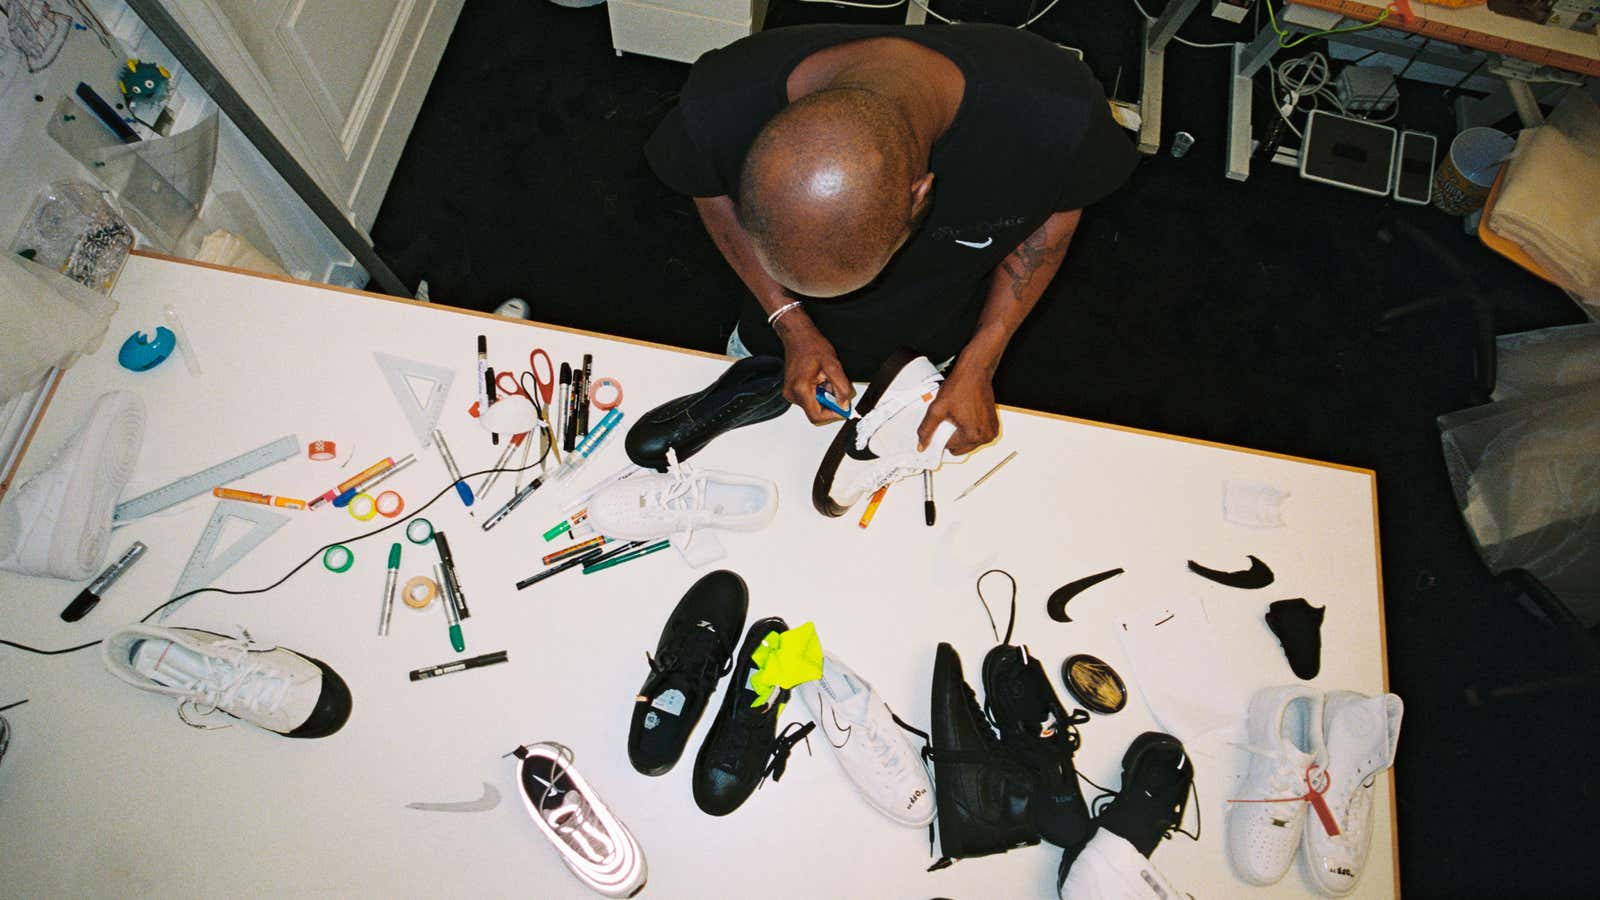 Nike and Virgil Abloh released a free textbook on the making of